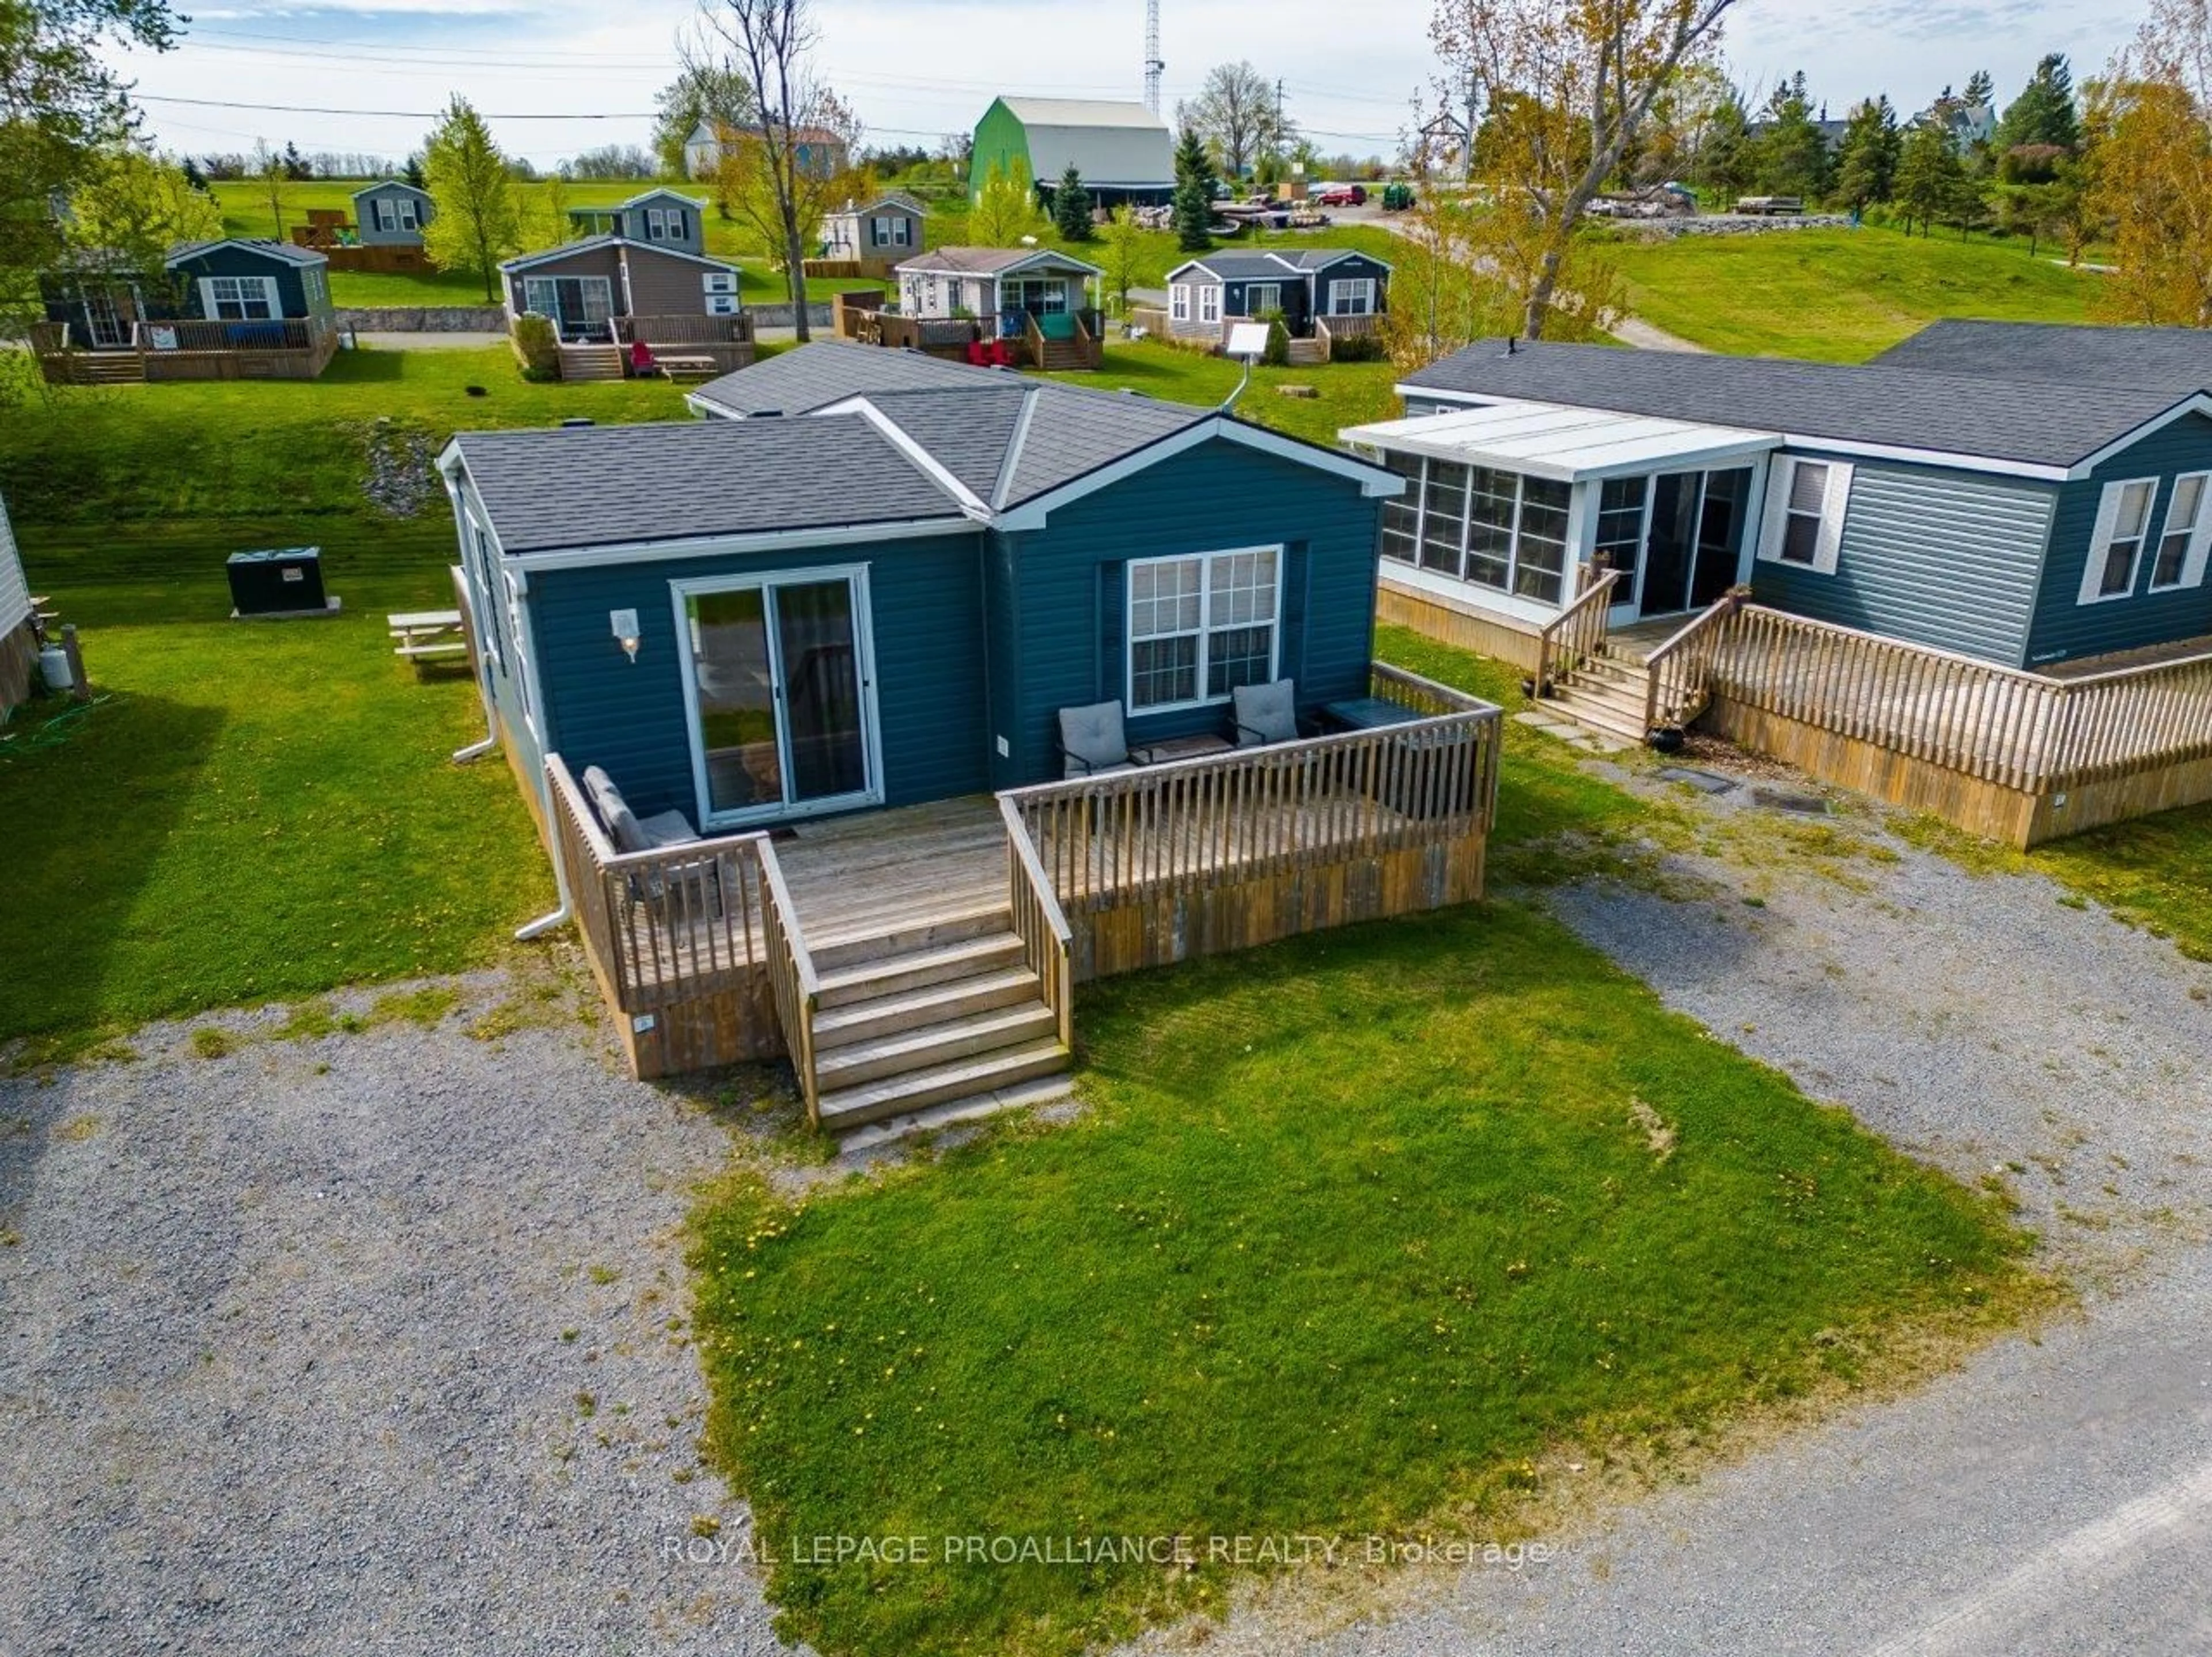 Cottage for 486 Cty Rd 18 - 8 Cricket Lane, Prince Edward County Ontario K0K 1P0